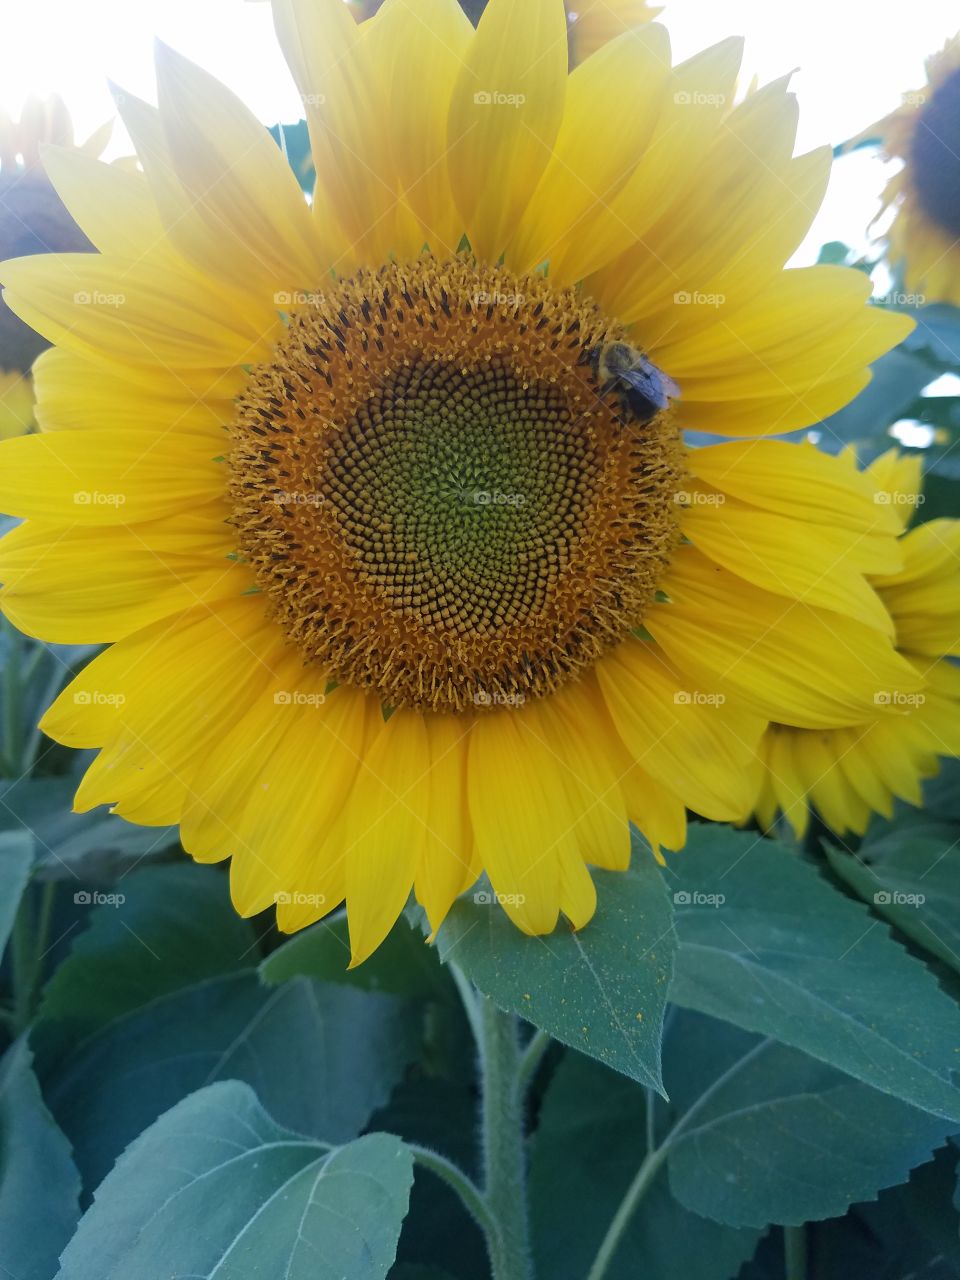 Sunflower from Penns Cave & Wildlife Park